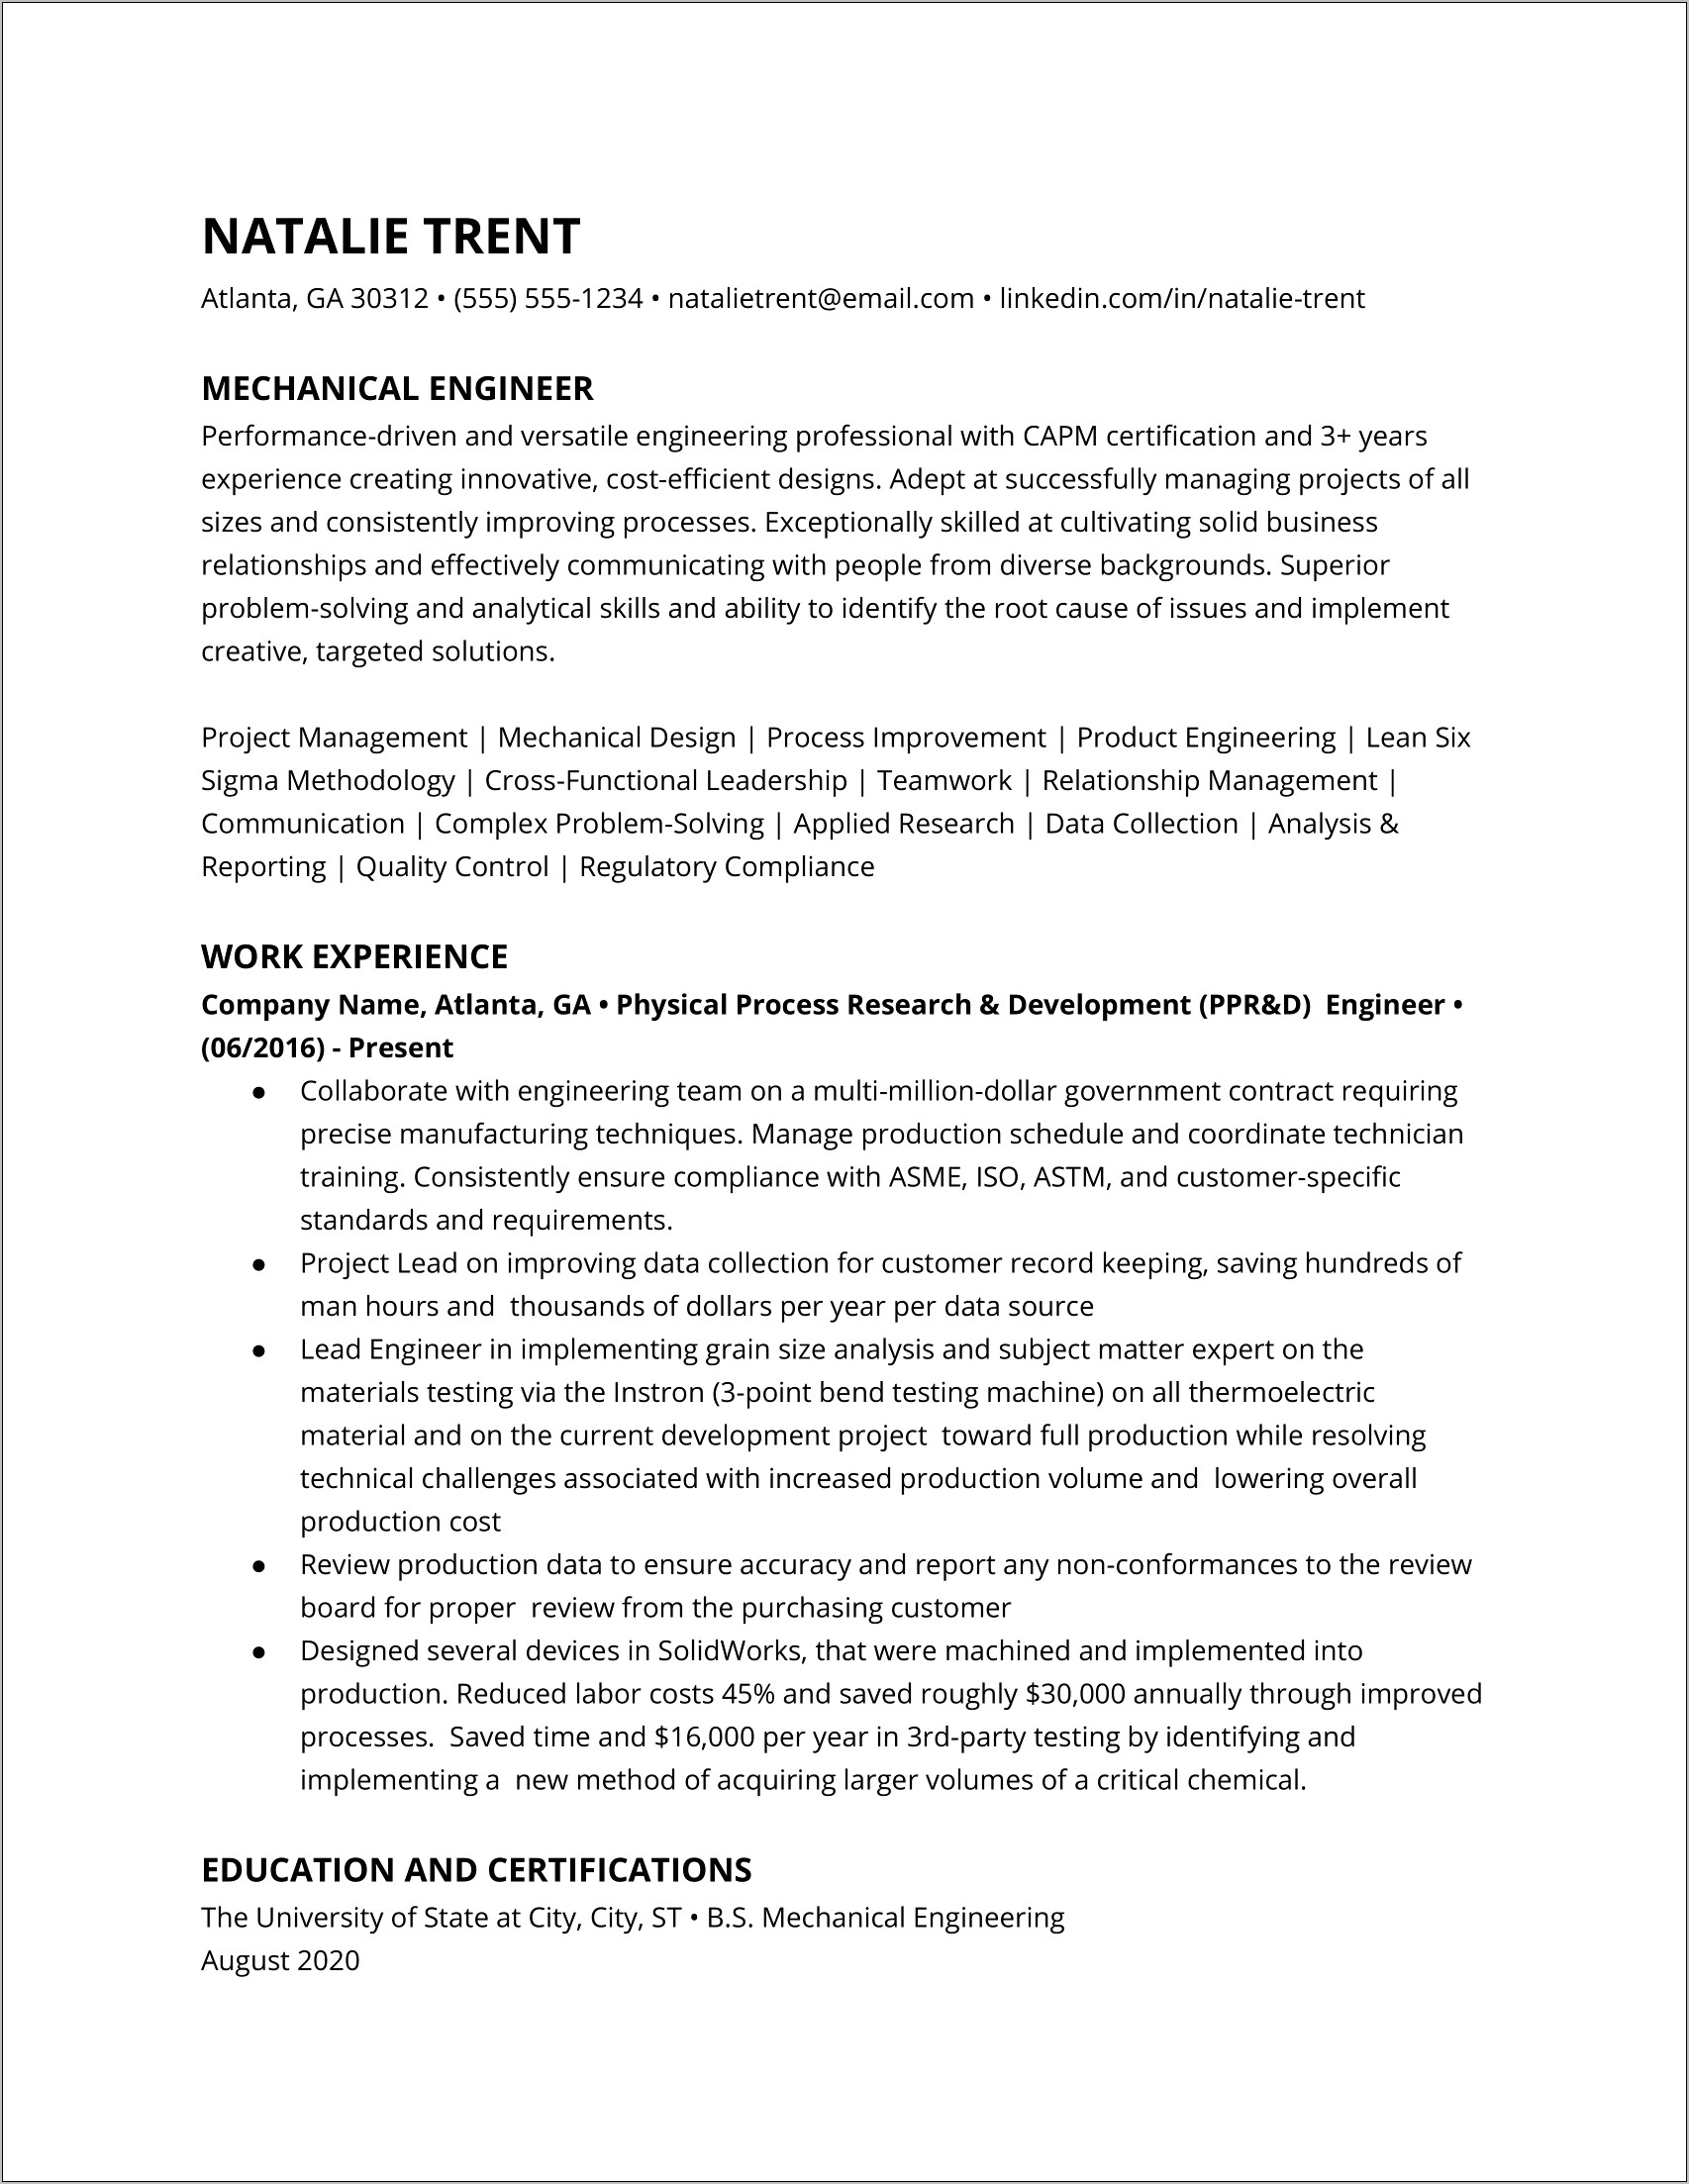 Example Of Resume For New Product Engineer